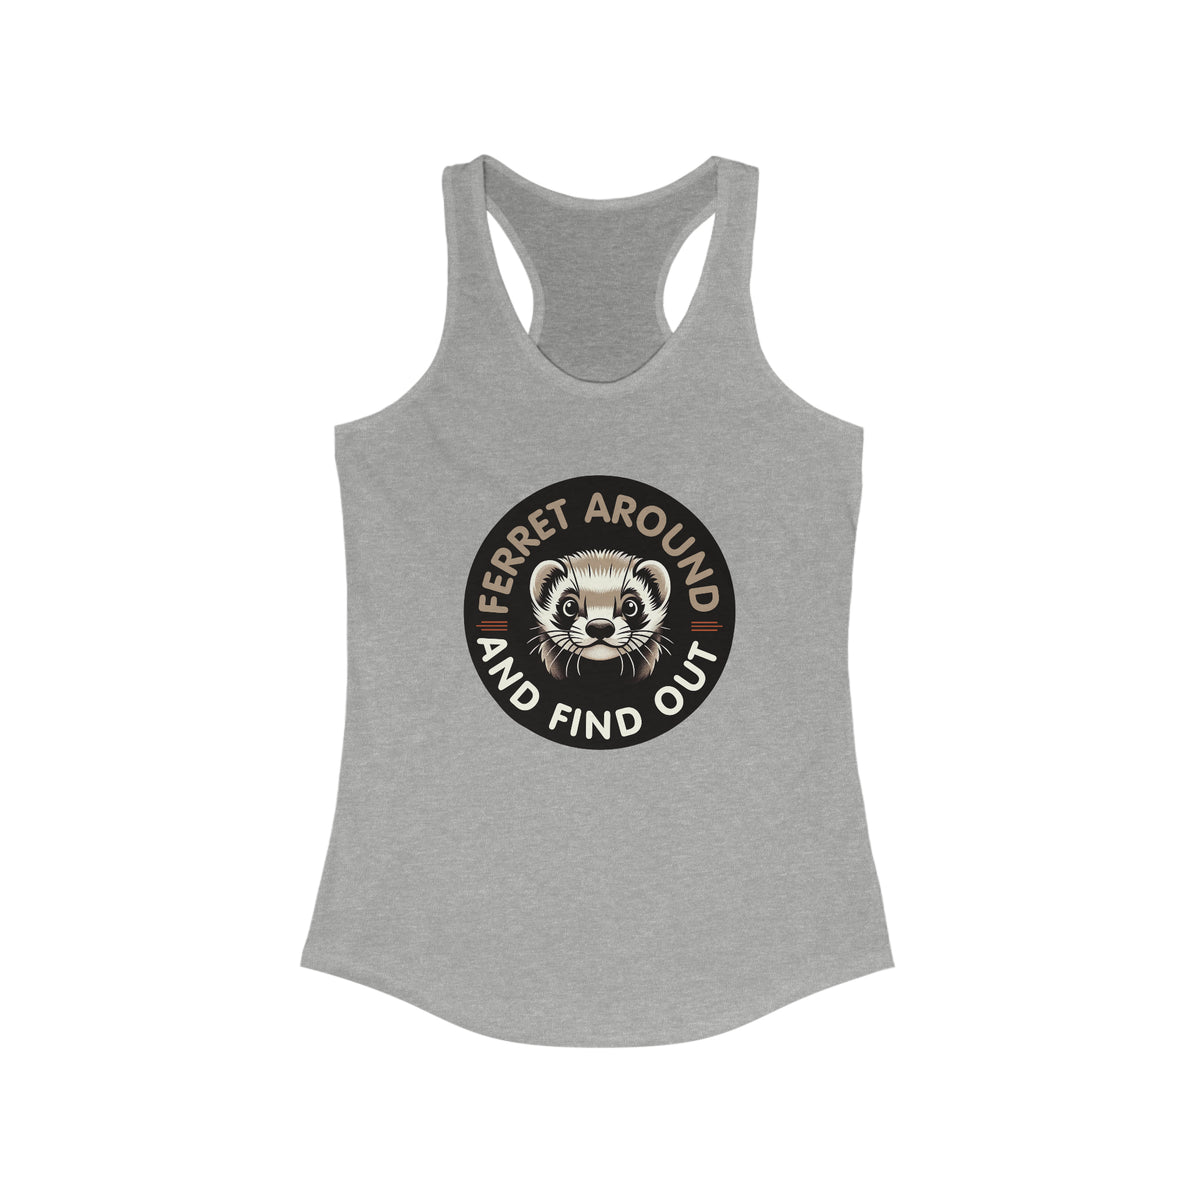 Ferret Around And Find Cute Ferret Shirt | Sarcastic Shirt | Funny Pet Ferret Gifts | Women's Slim-fit Racerback Tank Top